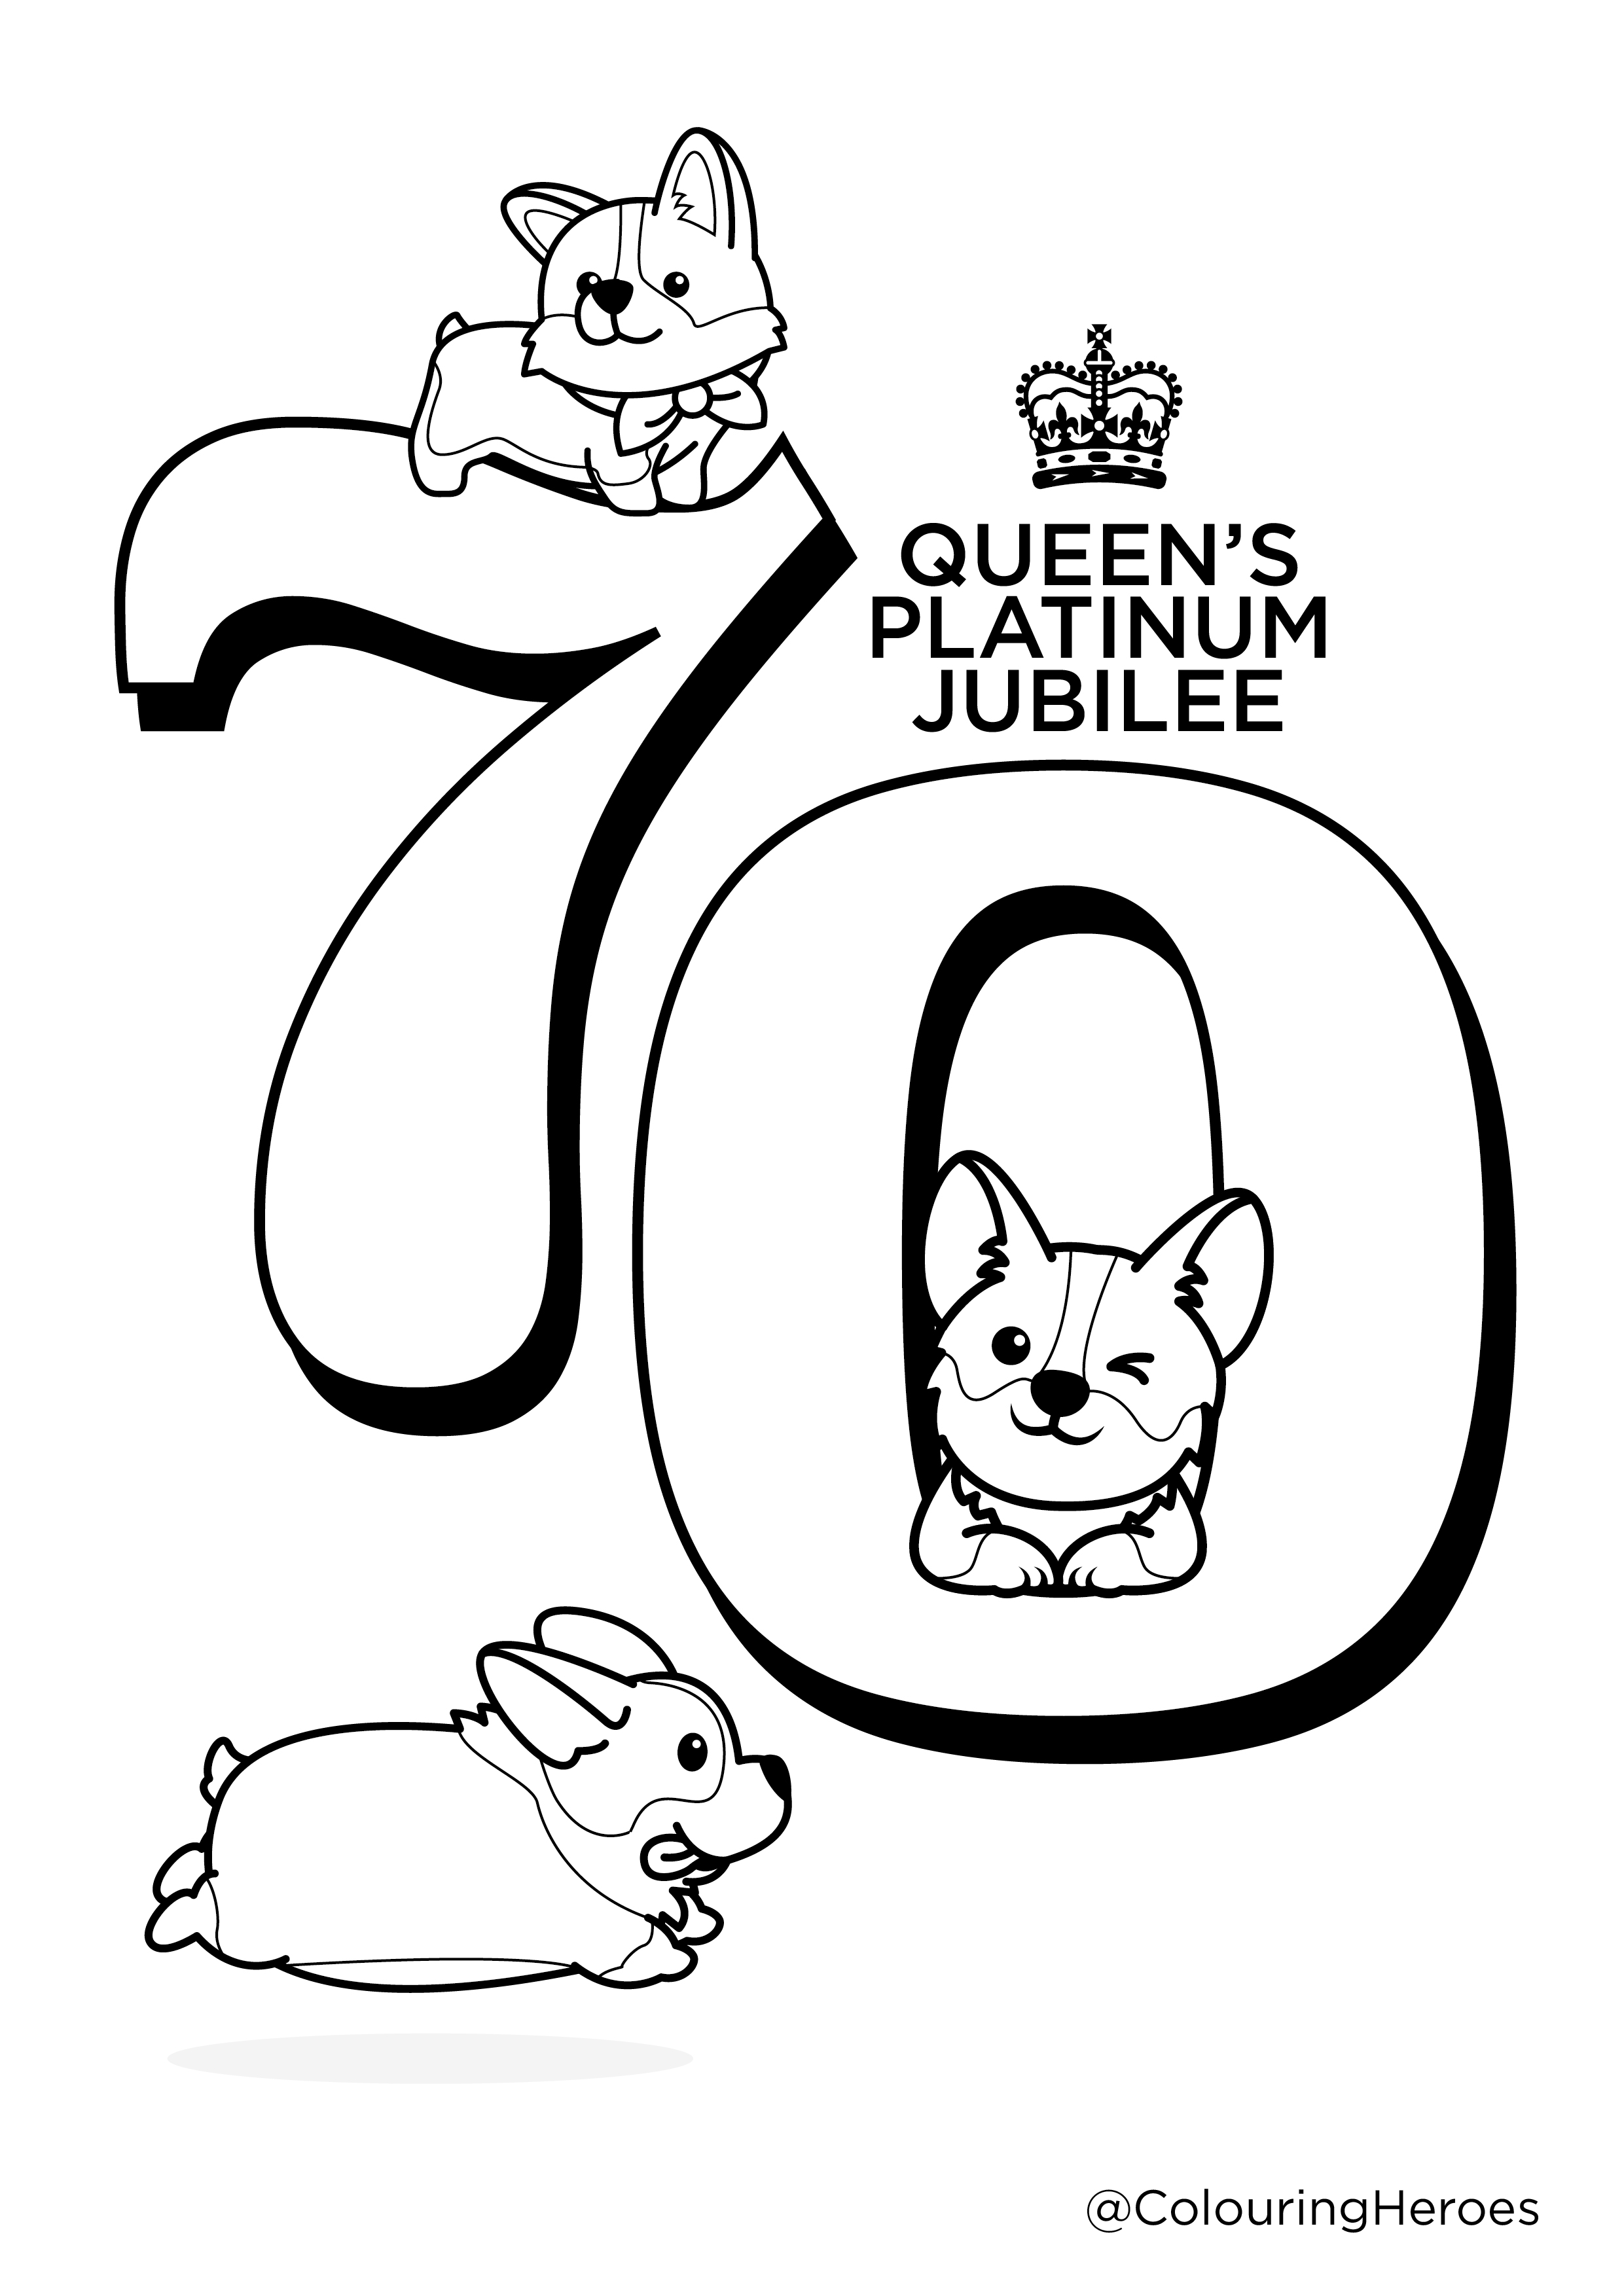 Queen's Platinum Jubilee '70' Colouring In Sheet